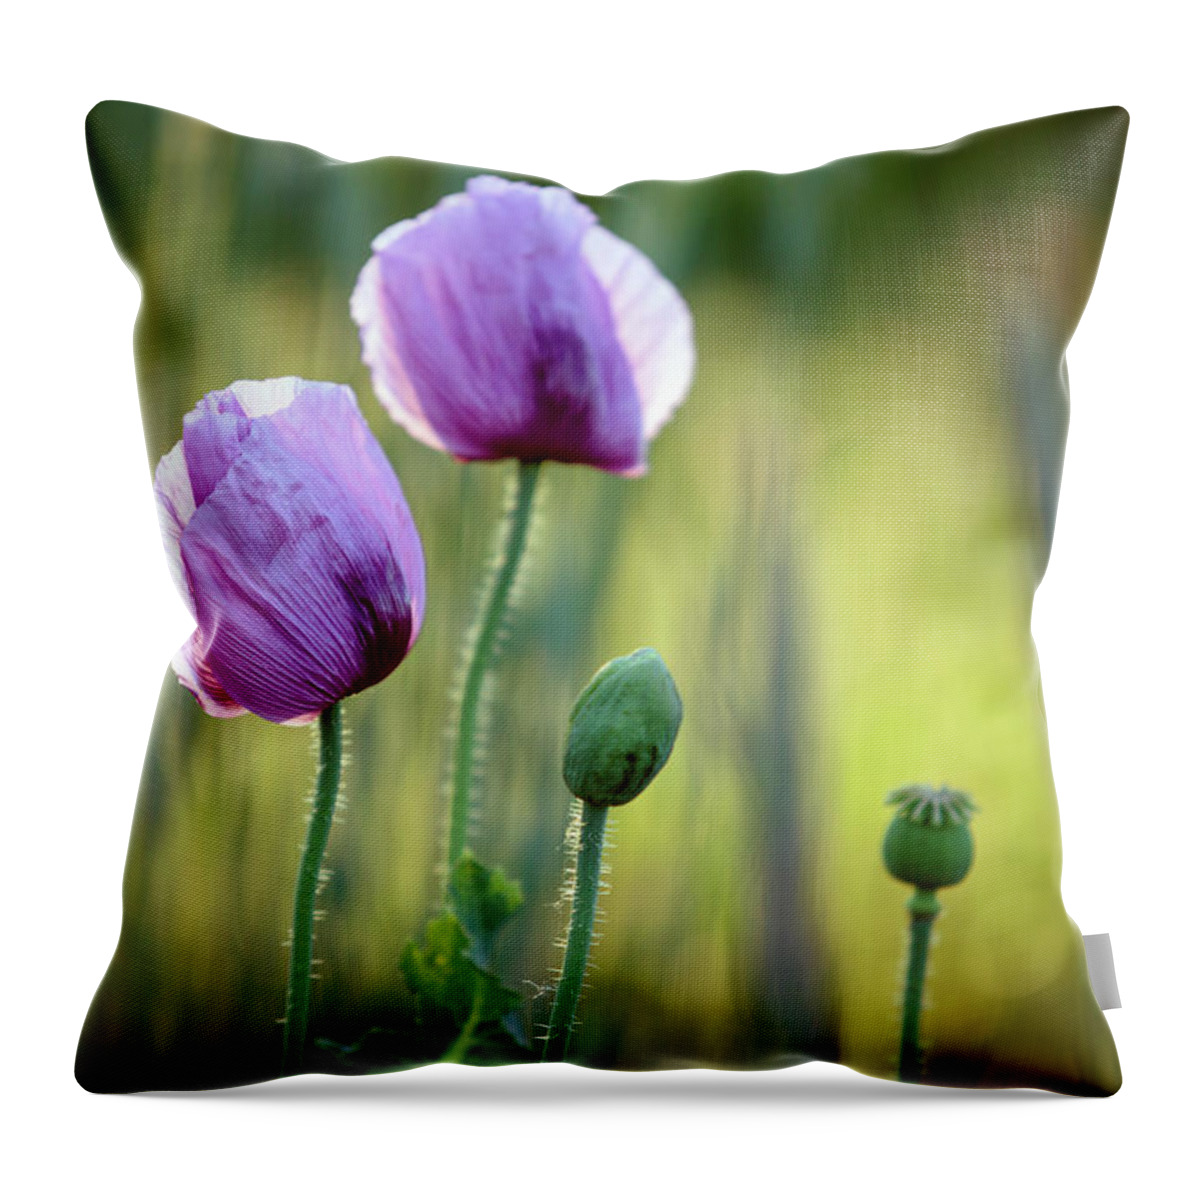 Palatinate Throw Pillow featuring the photograph Lilac Poppy Flowers by Nailia Schwarz